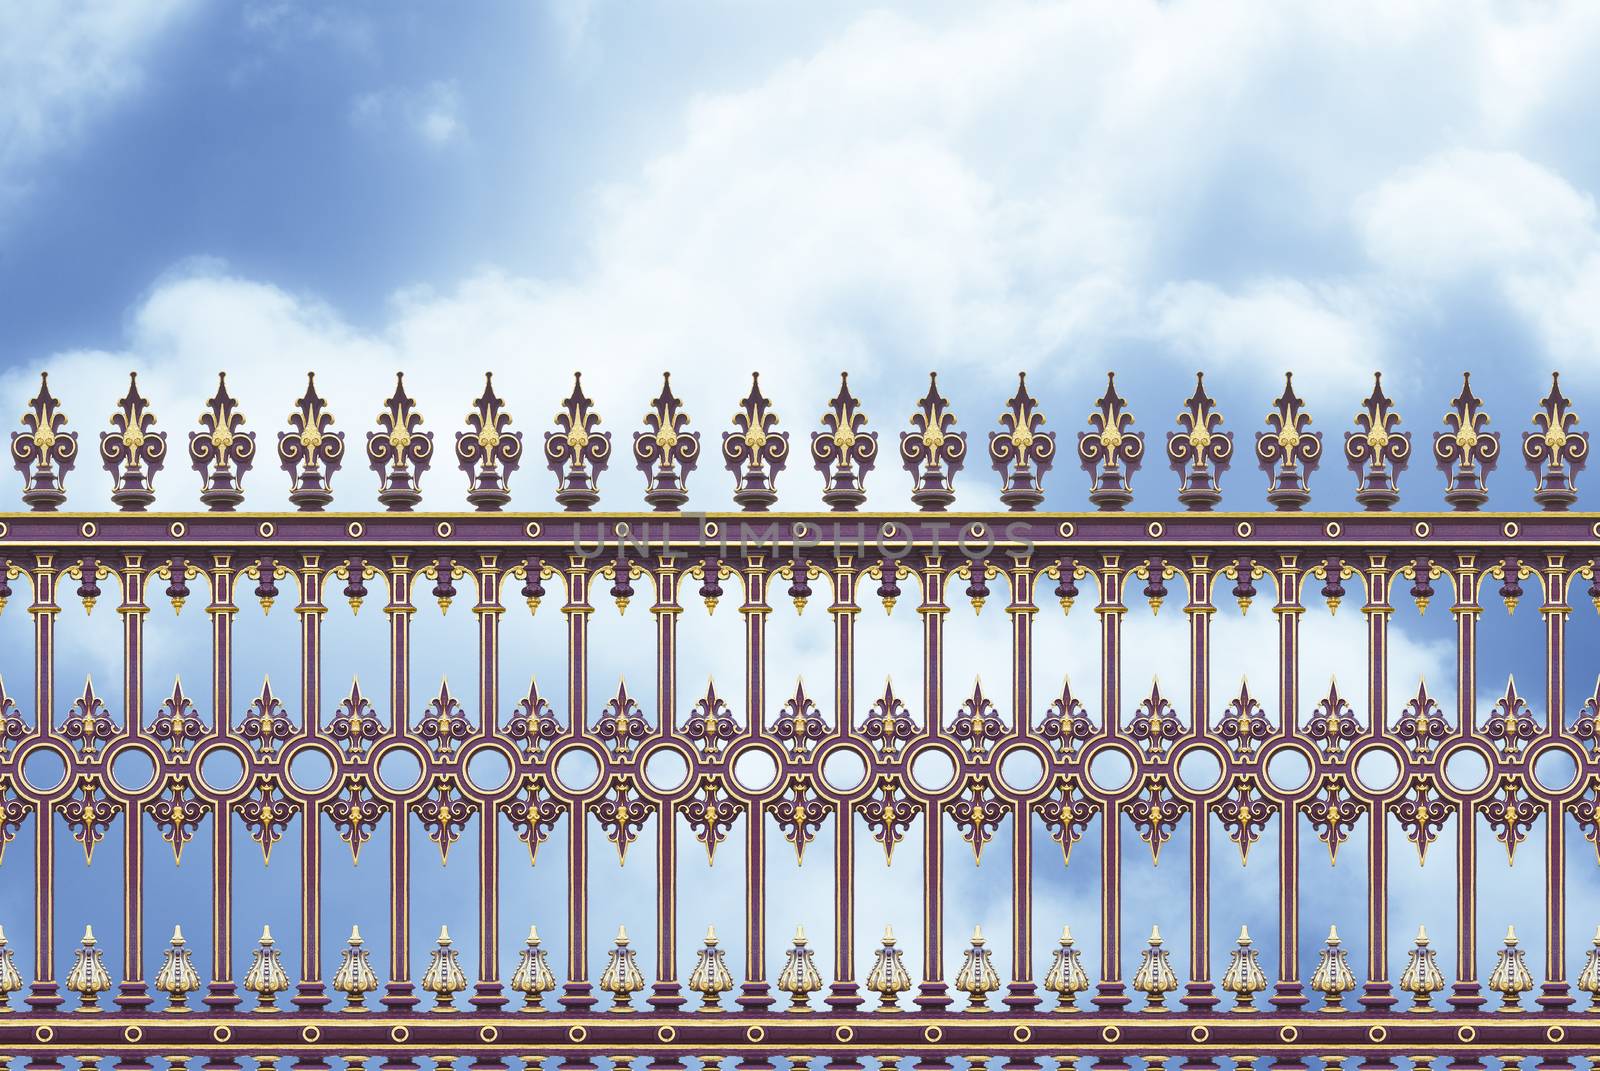 Detail of an old cast iron gate in Wien (Austria - Europe) against a clody sky - concept image